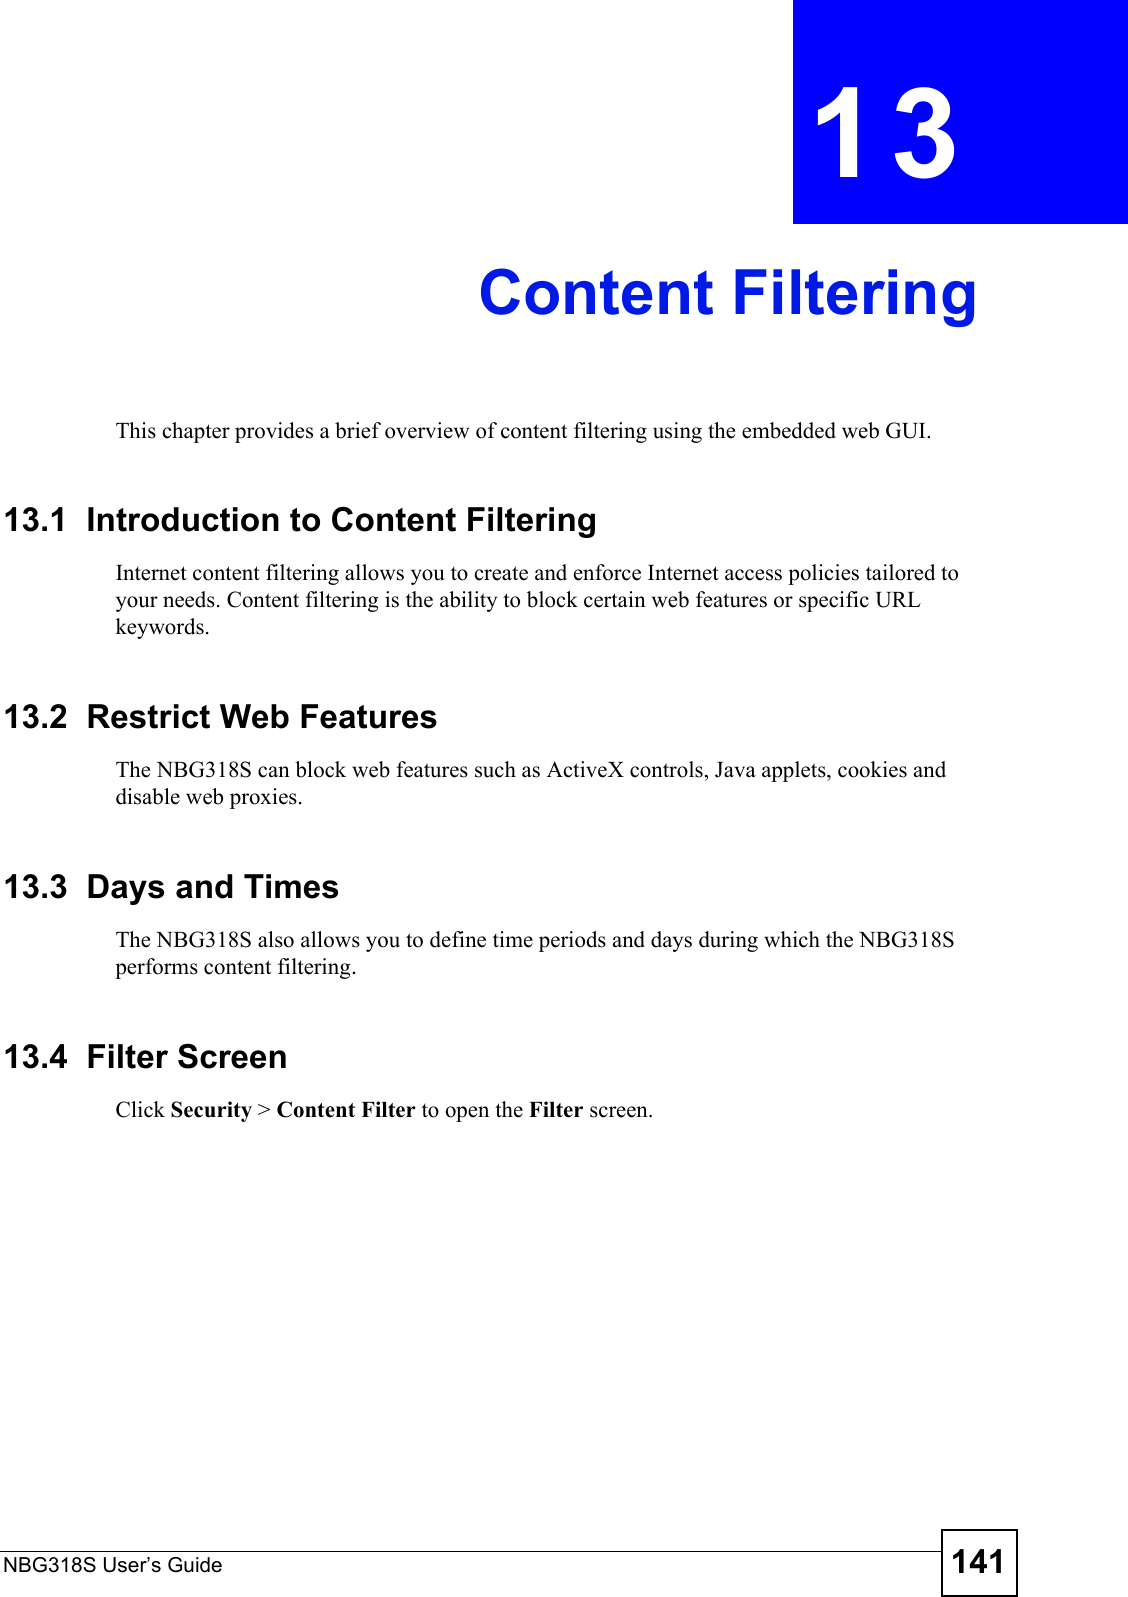 NBG318S User’s Guide 141CHAPTER  13 Content FilteringThis chapter provides a brief overview of content filtering using the embedded web GUI.13.1  Introduction to Content FilteringInternet content filtering allows you to create and enforce Internet access policies tailored to your needs. Content filtering is the ability to block certain web features or specific URL keywords.13.2  Restrict Web FeaturesThe NBG318S can block web features such as ActiveX controls, Java applets, cookies and disable web proxies. 13.3  Days and TimesThe NBG318S also allows you to define time periods and days during which the NBG318S performs content filtering.13.4  Filter ScreenClick Security &gt; Content Filter to open the Filter screen. 